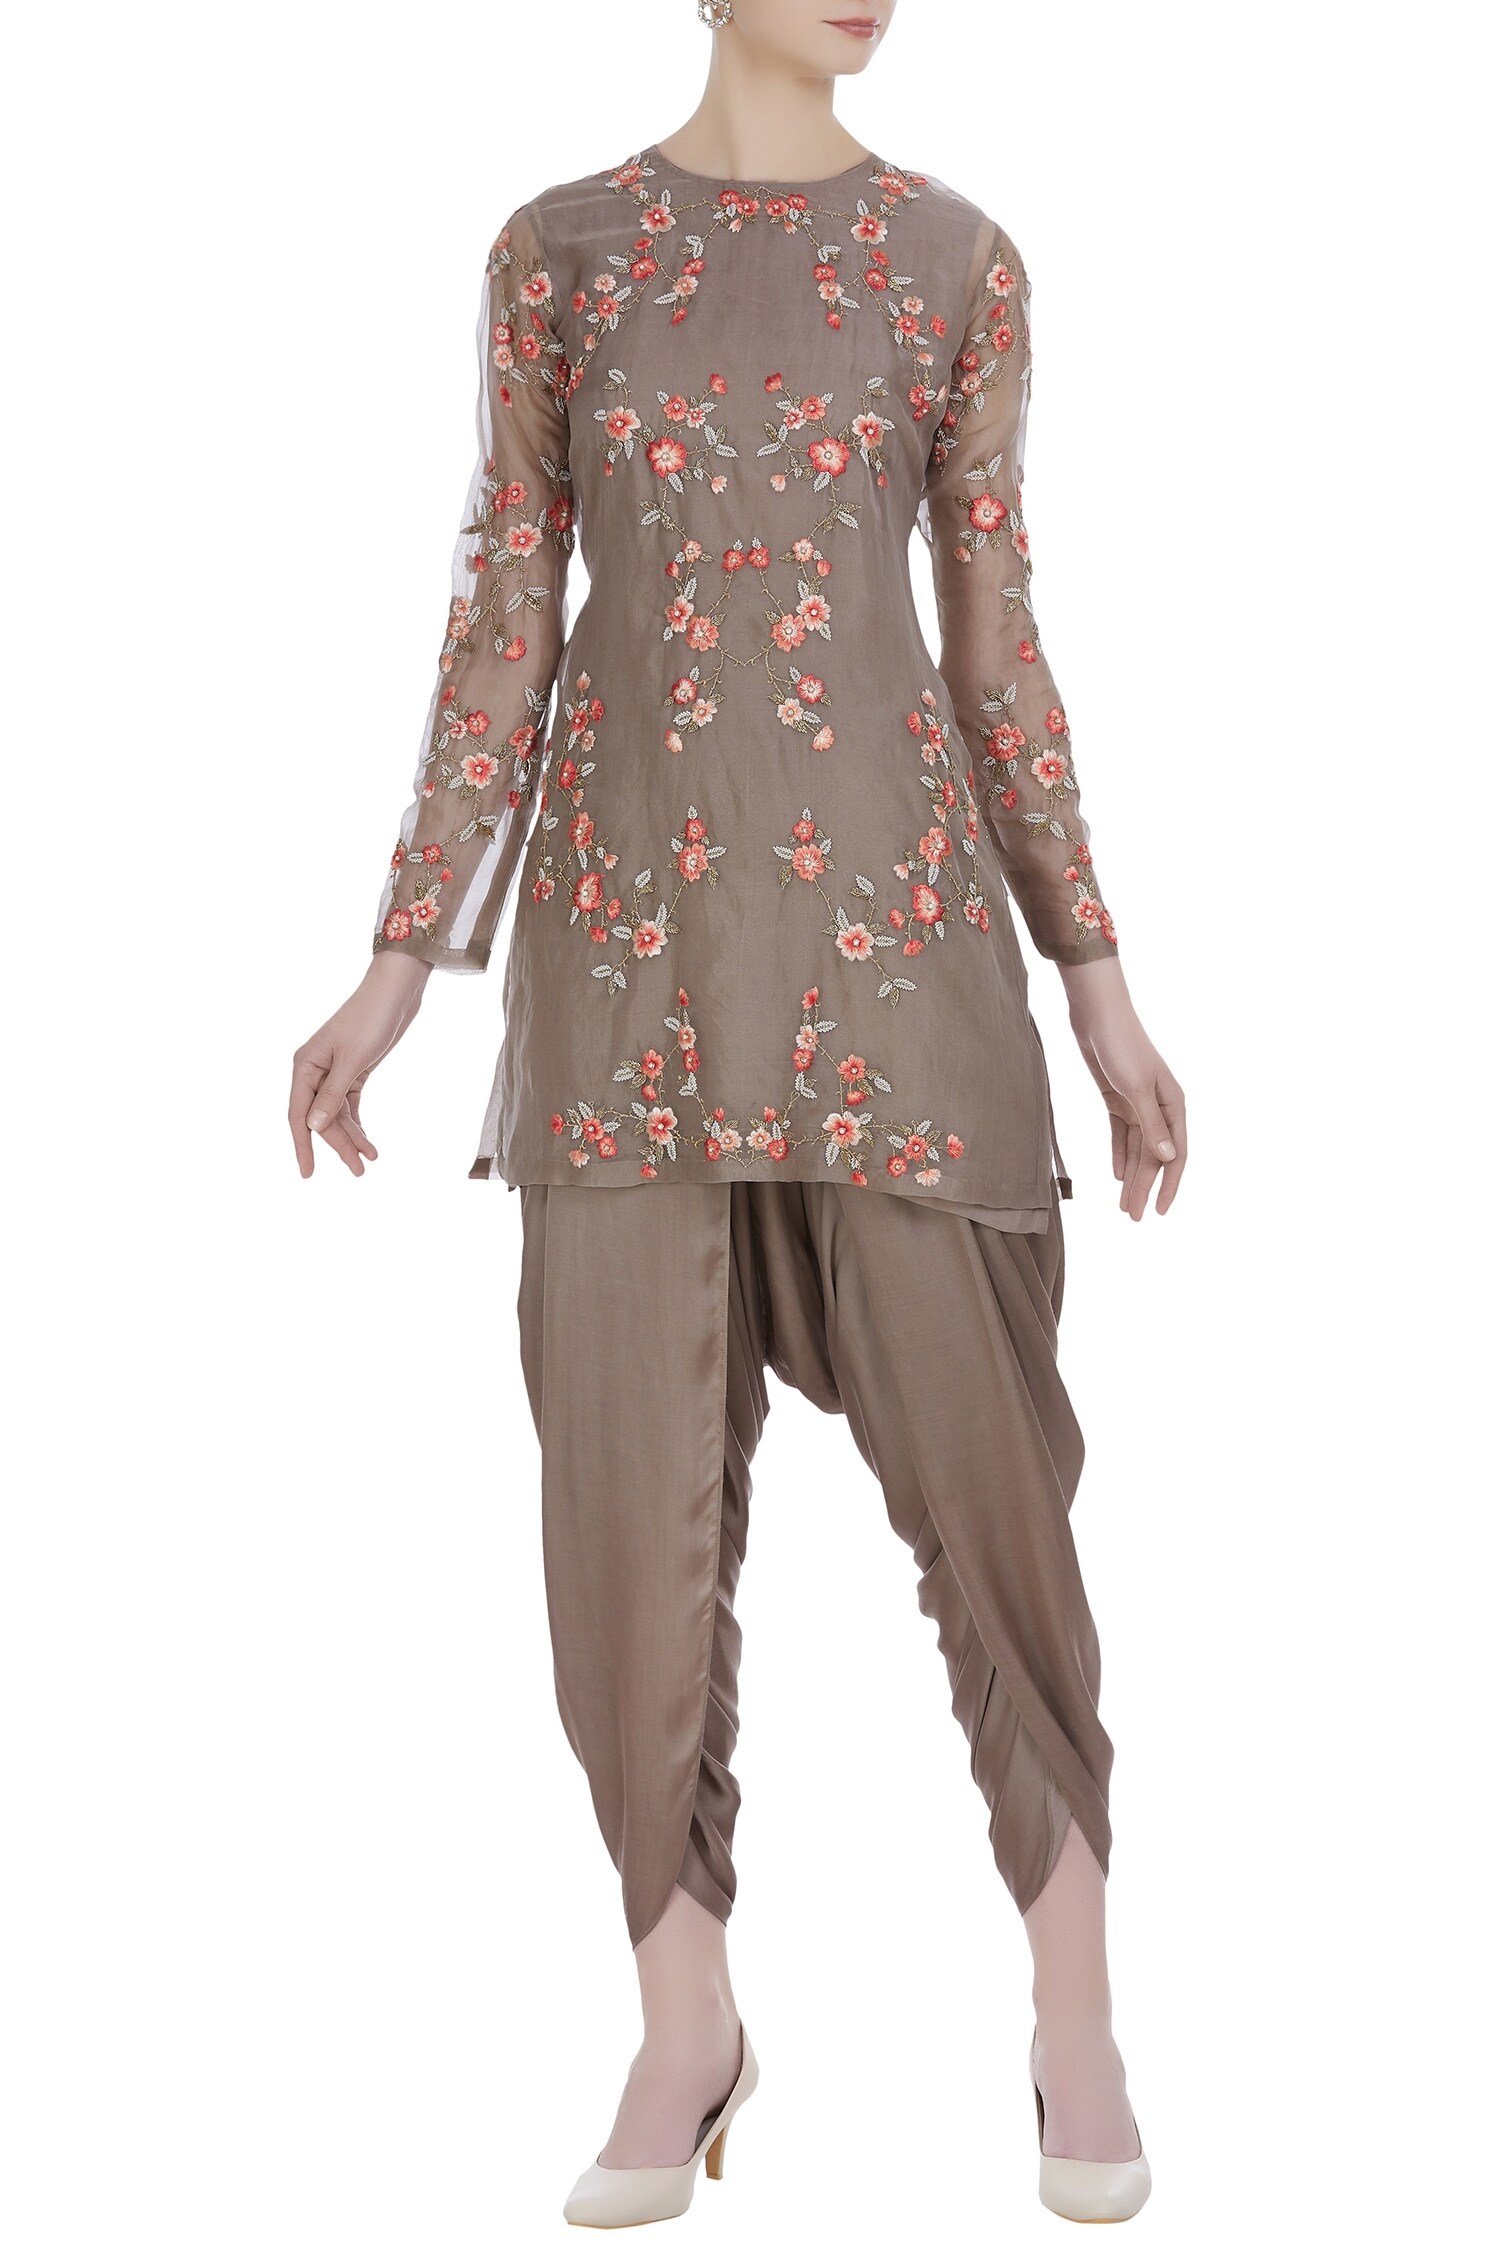 Incheetape Brown Embroidered Top With Dhoti Pants